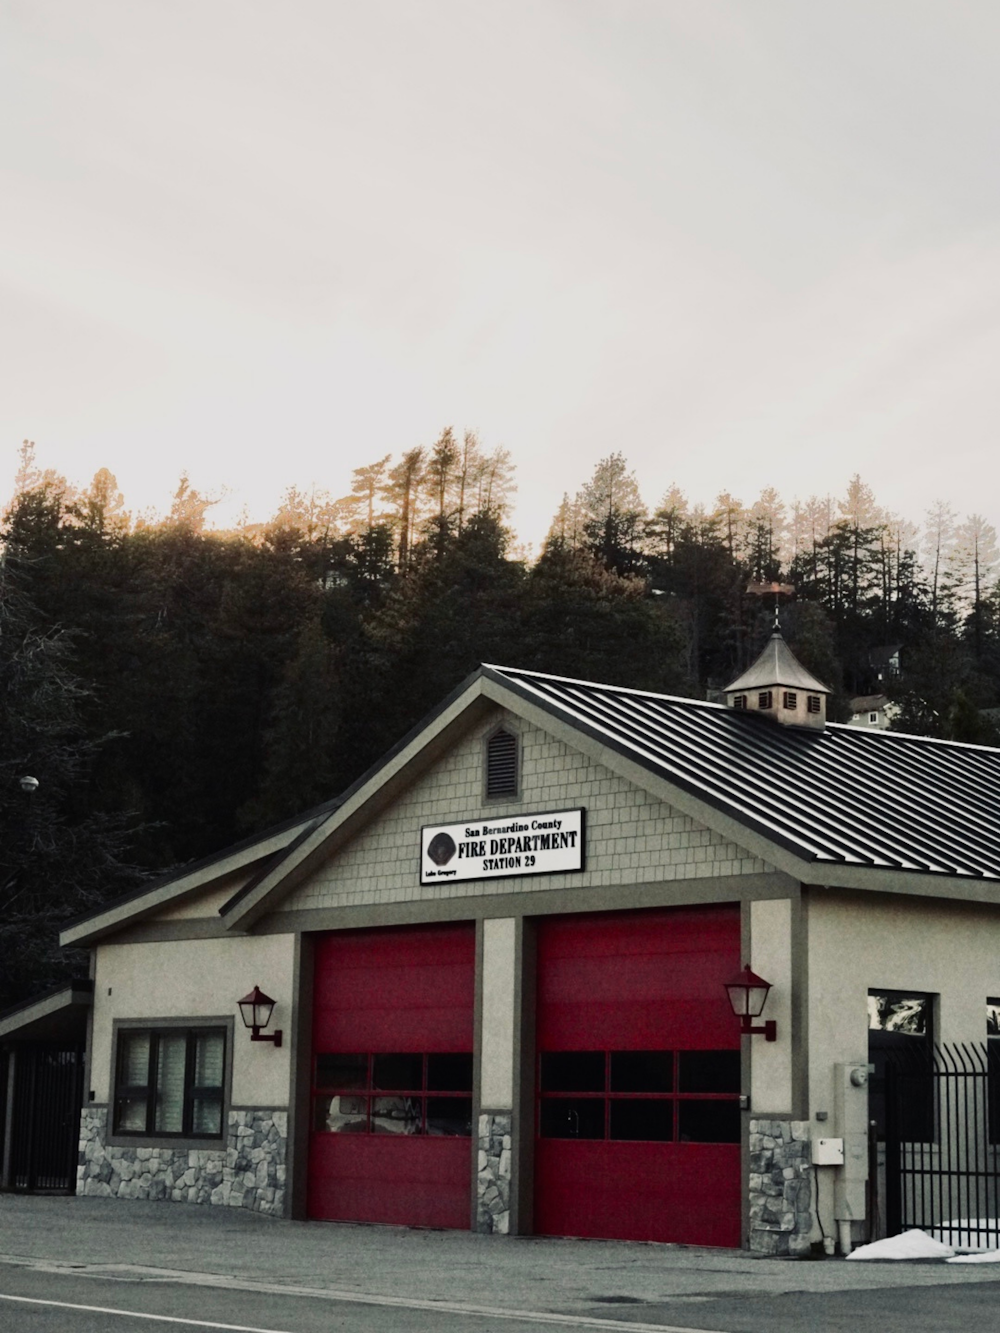 a fire station with a red fire hydrant in front of it